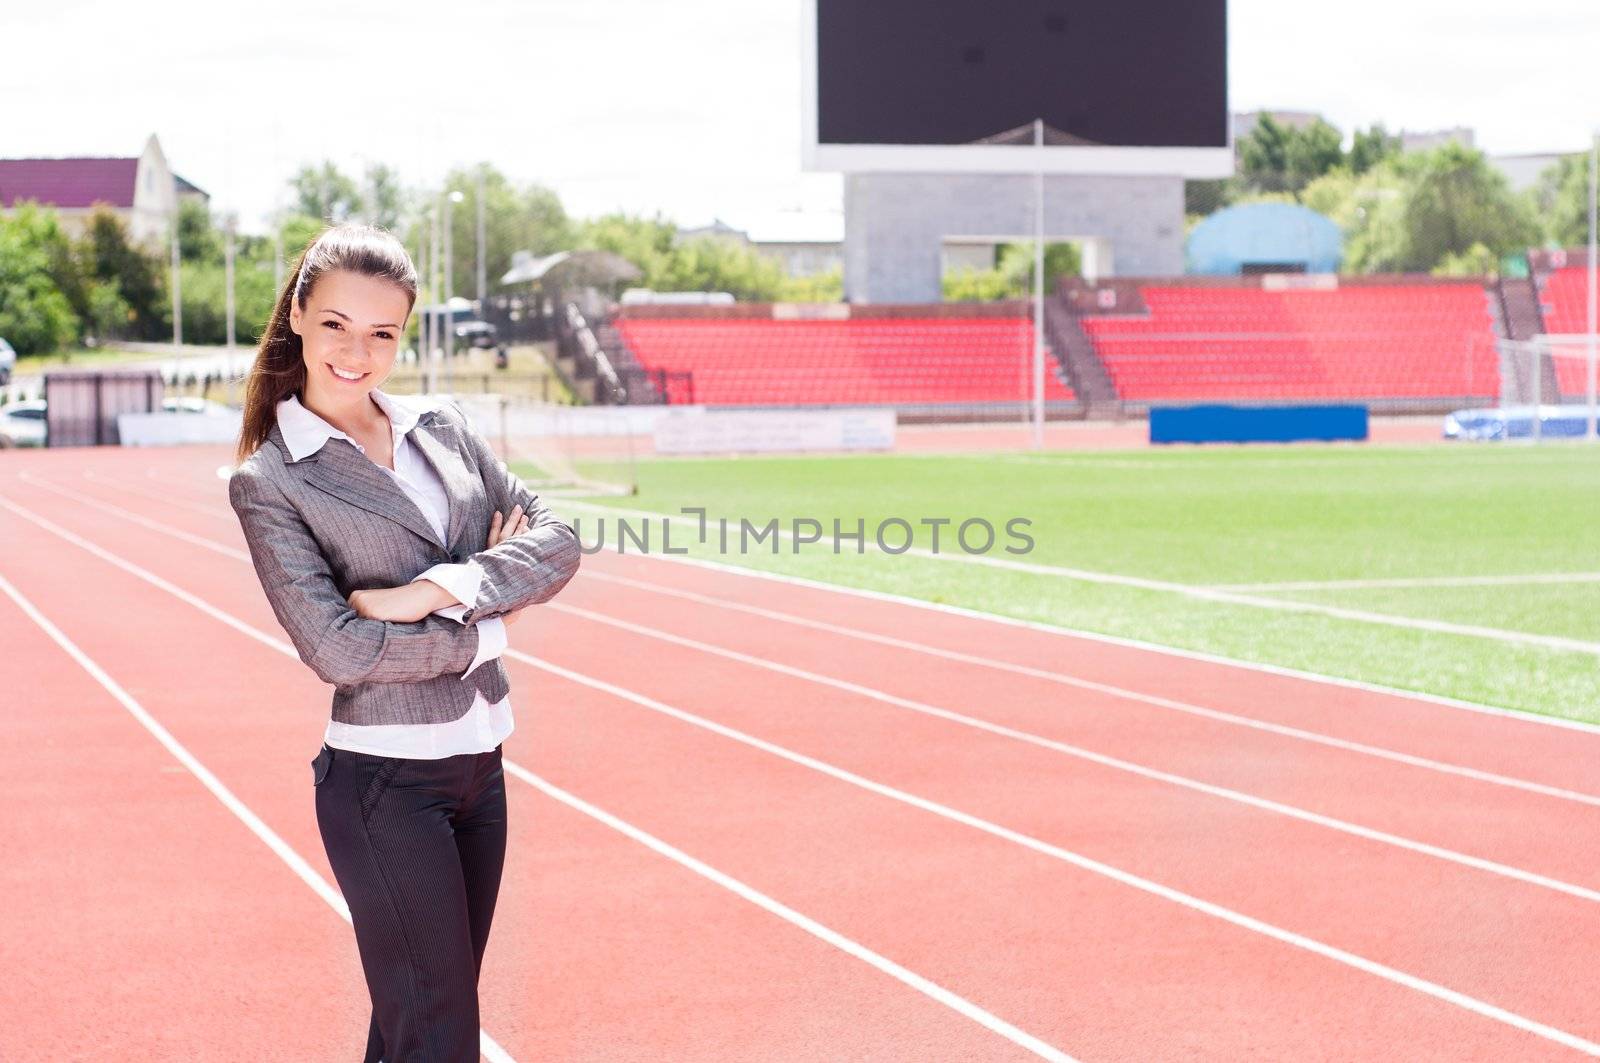 portrait of a beautiful business woman at a sports stadium, the competition in the business